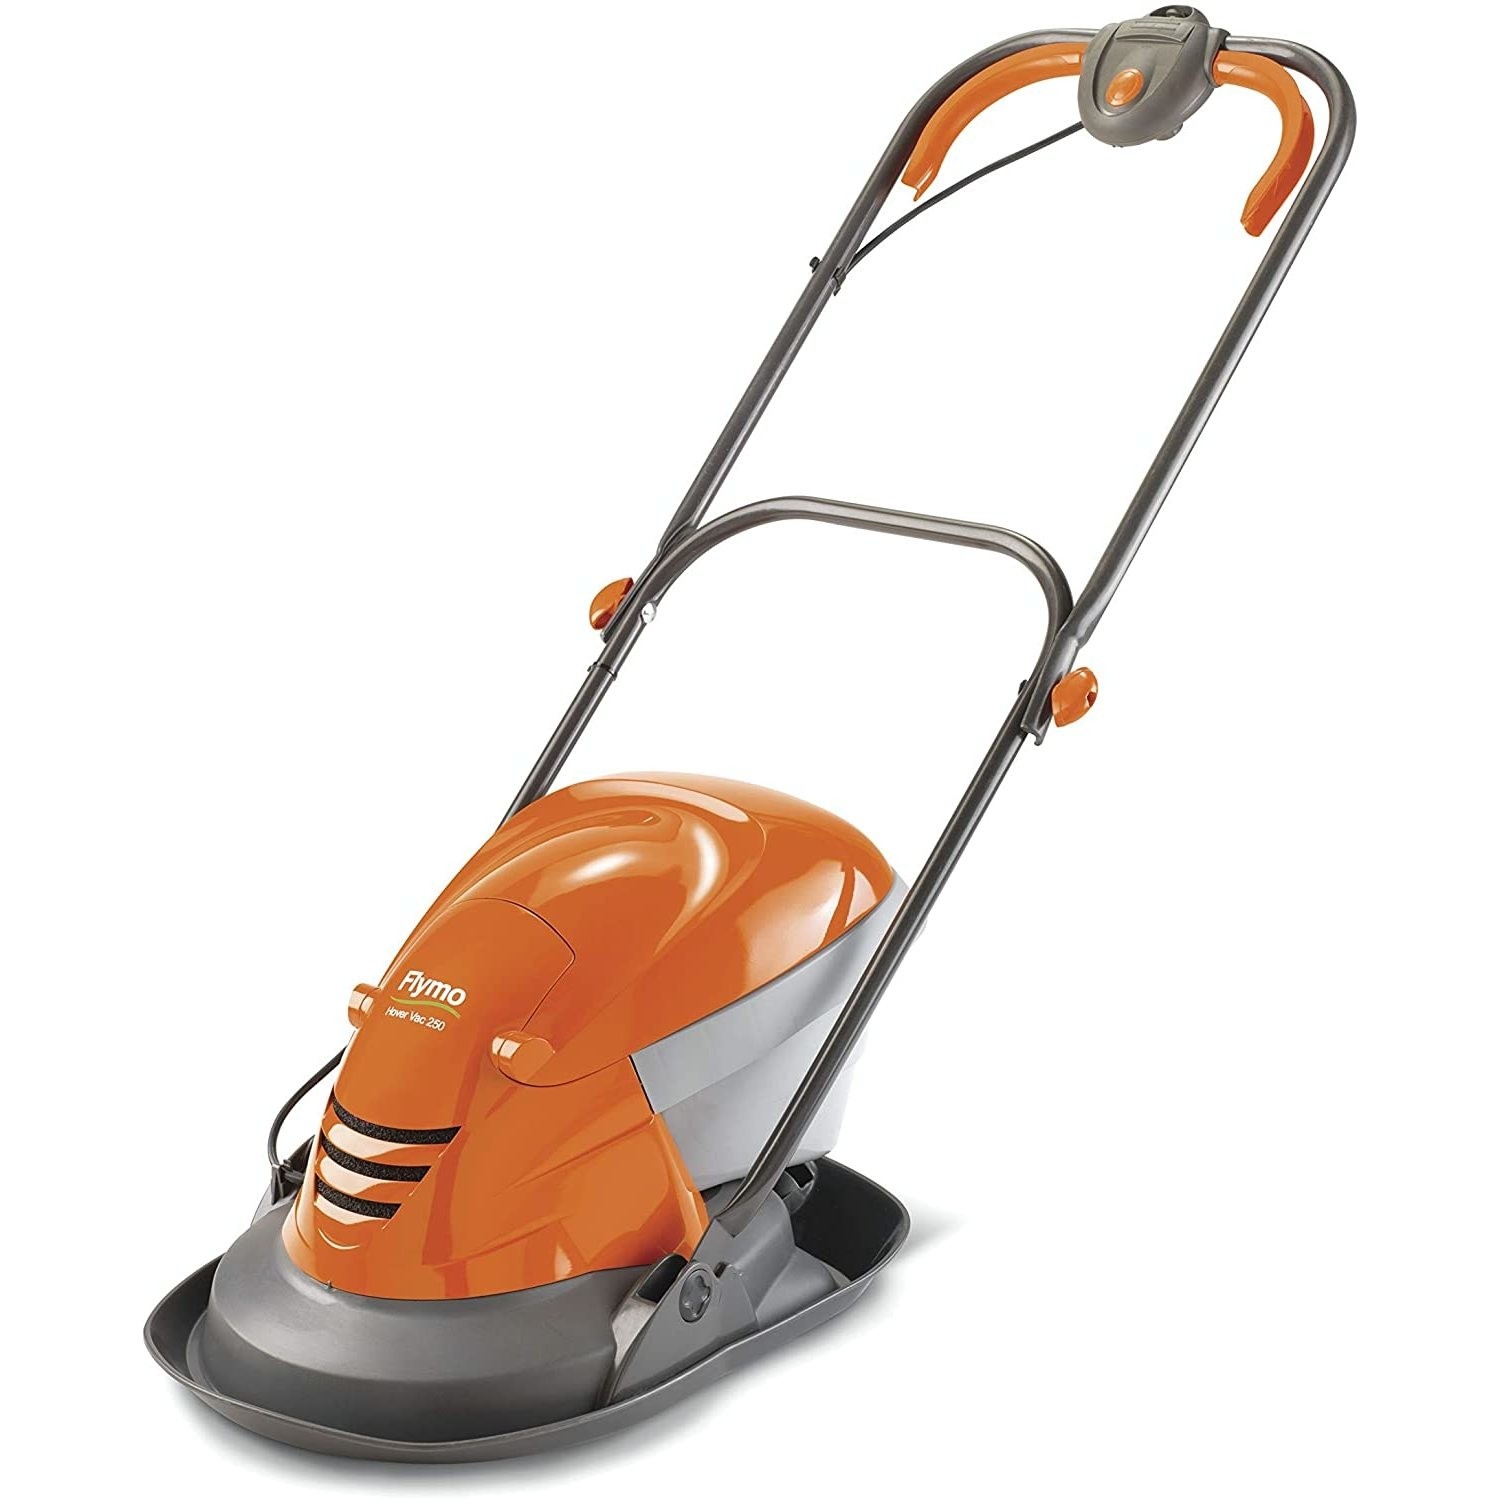 Flymo HoverVac 250 Hover Lawnmower